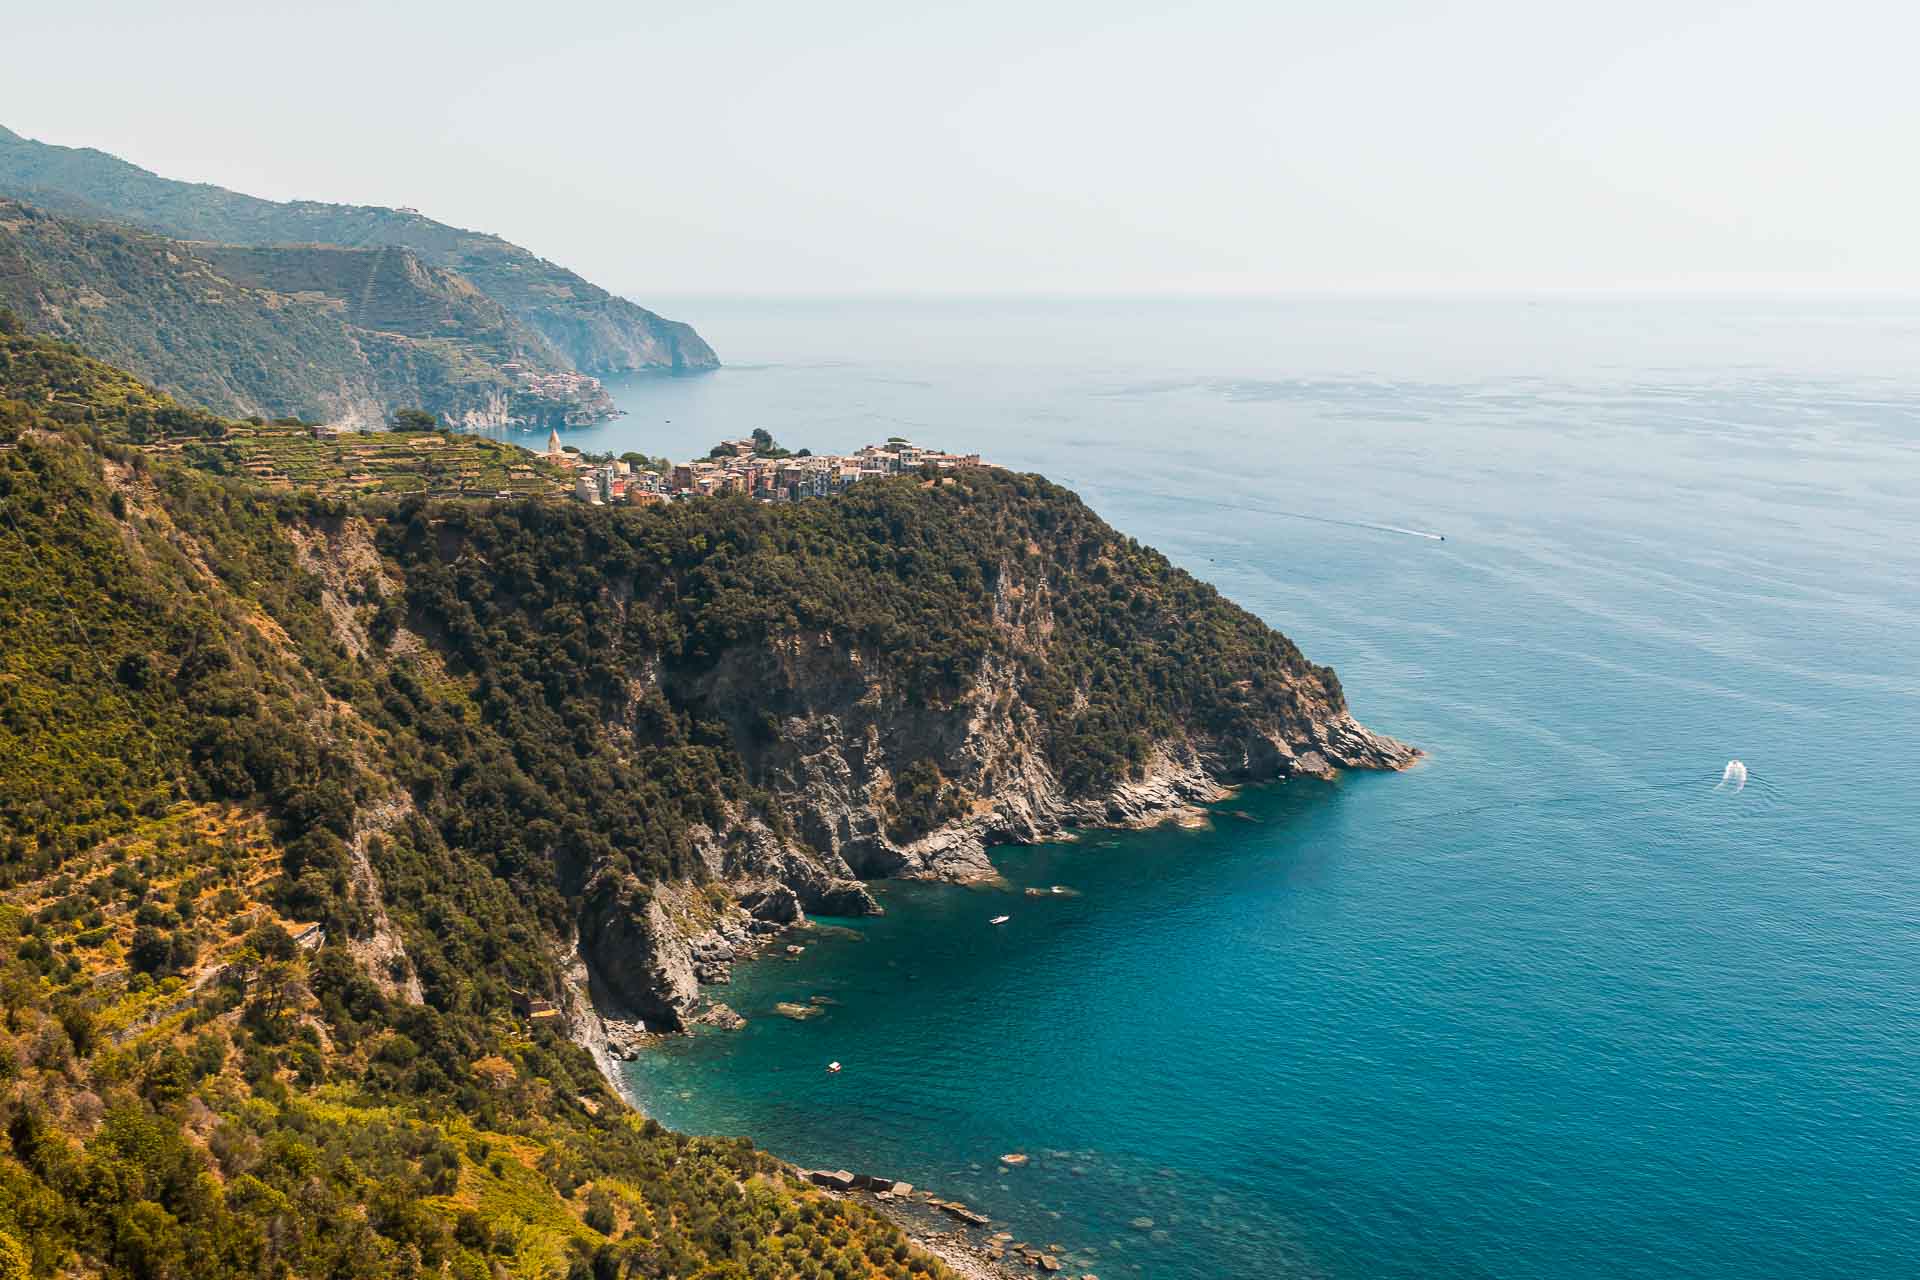 Overview of the Cinque Terre with a village on top of the mountain and the sea